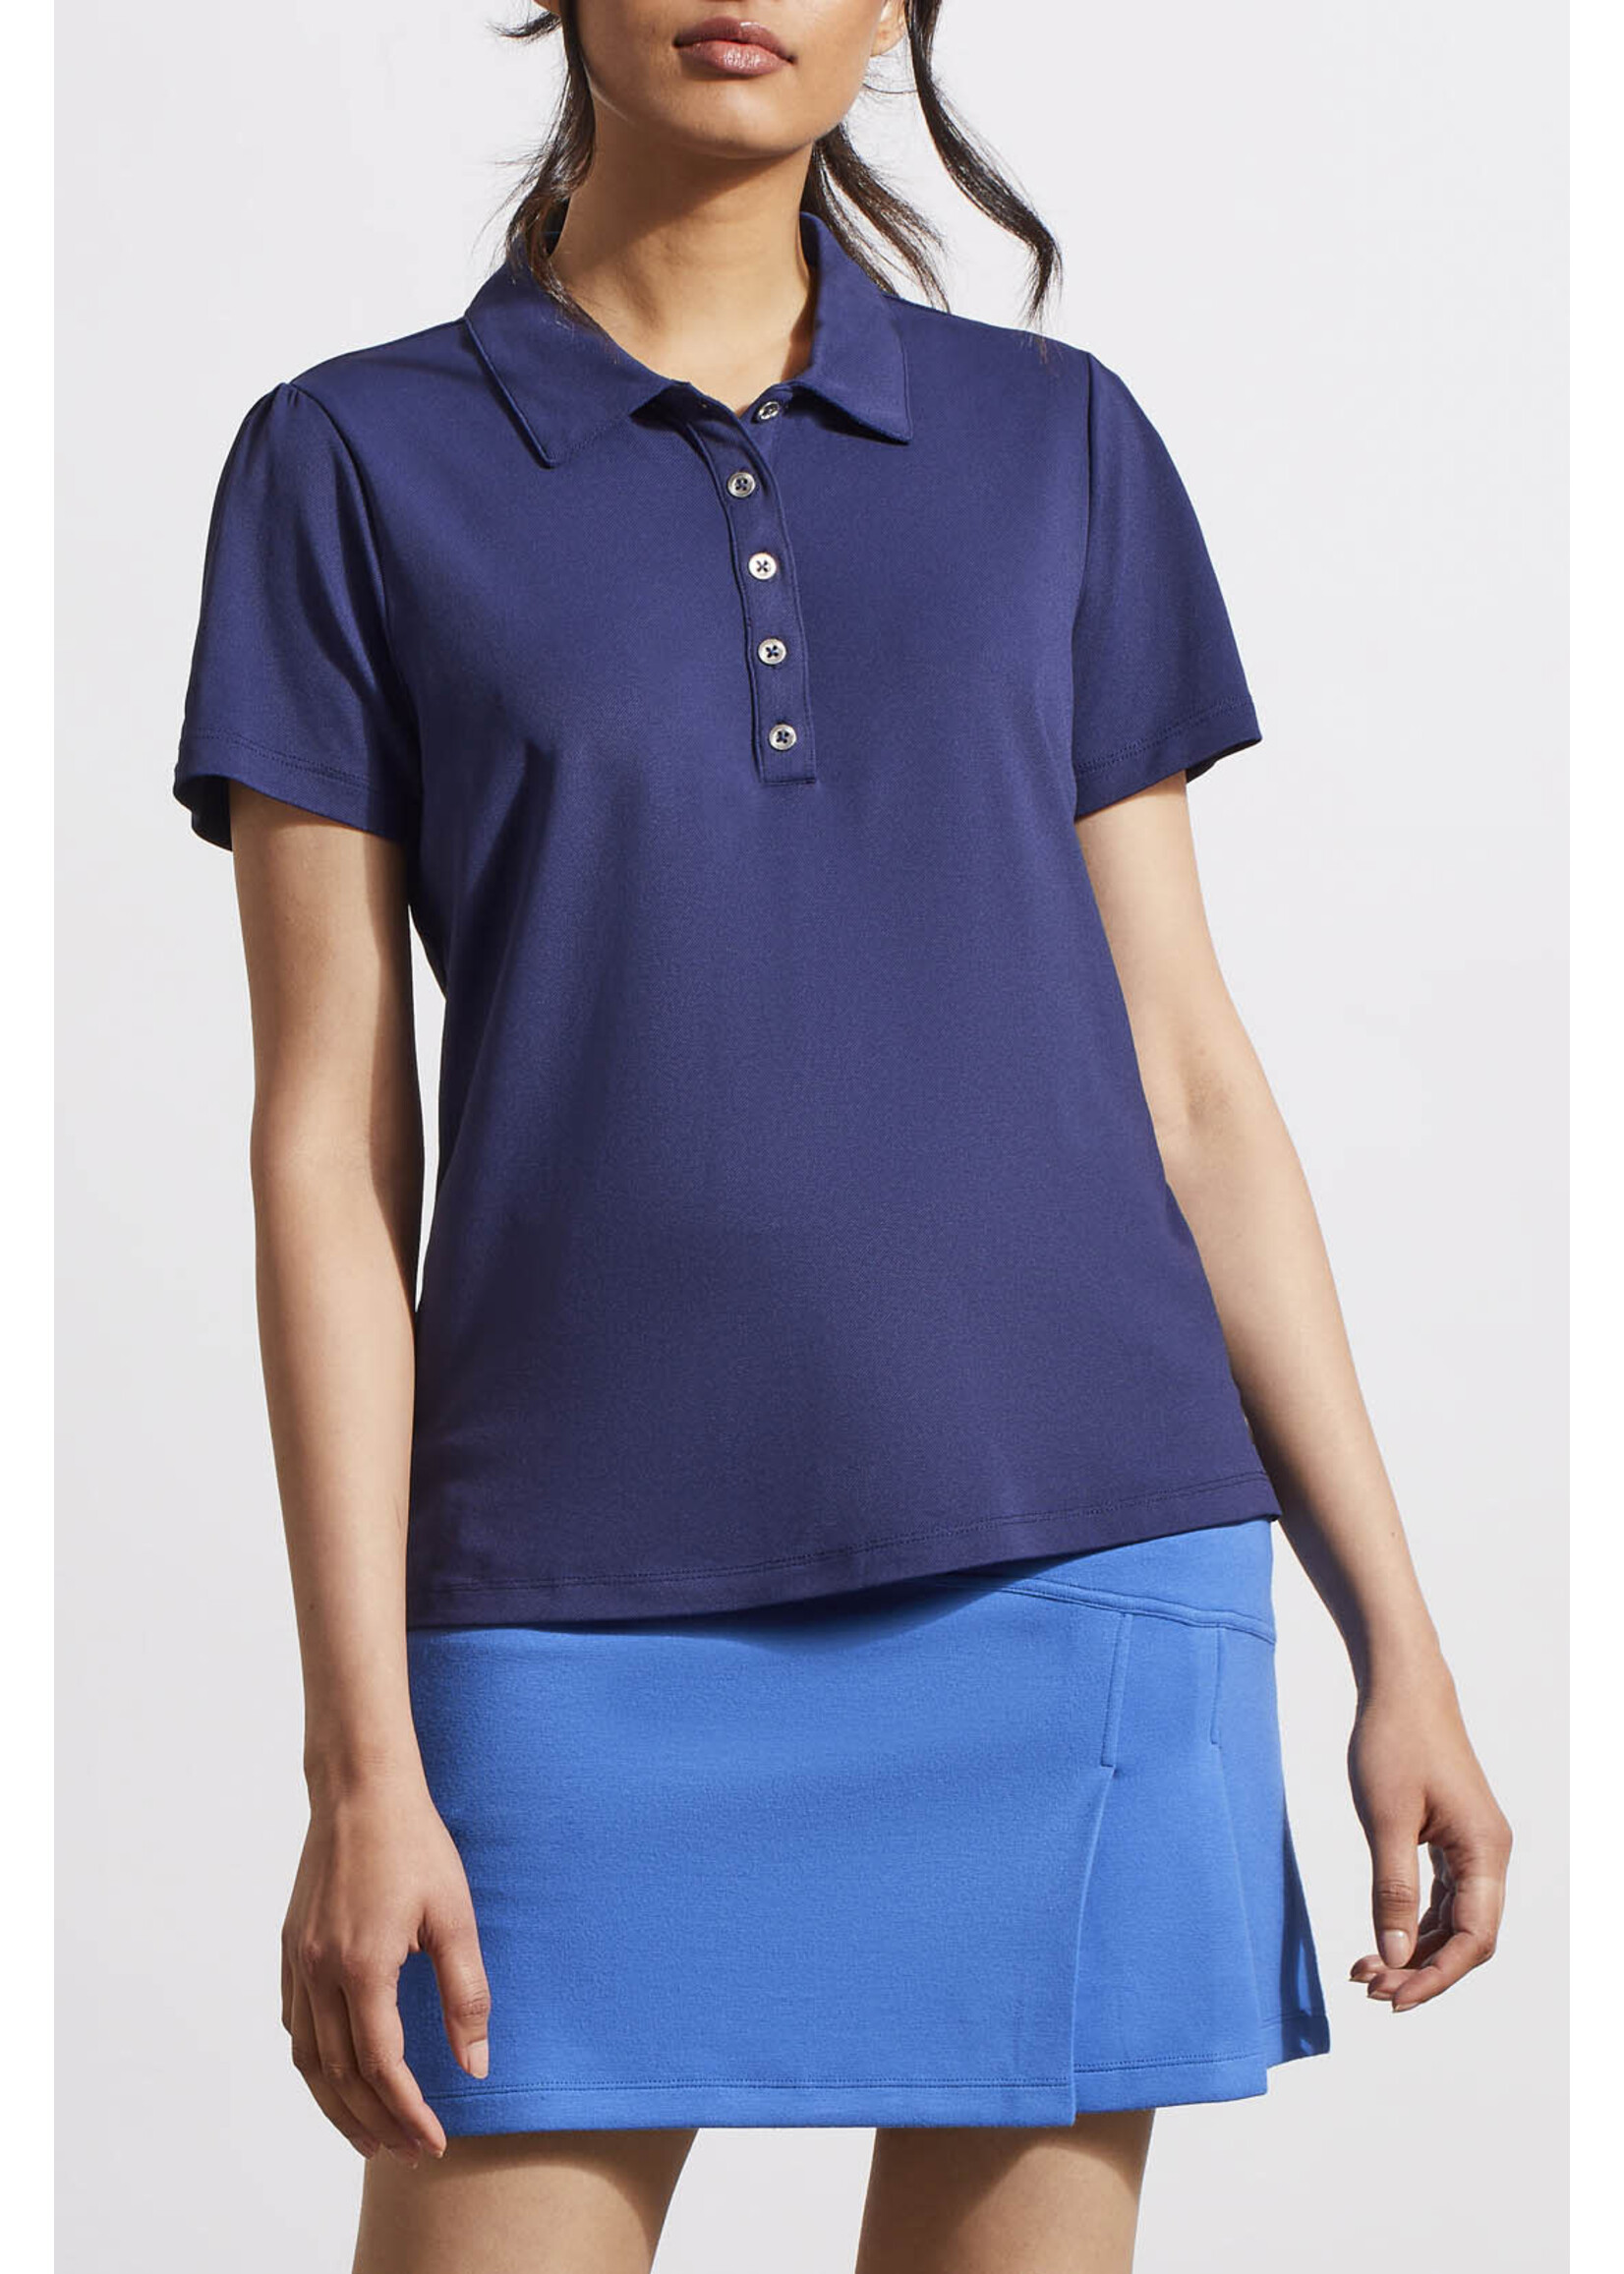 Tribal POLO TOP W/BUTTONS-JET BLUE 1800O-3903